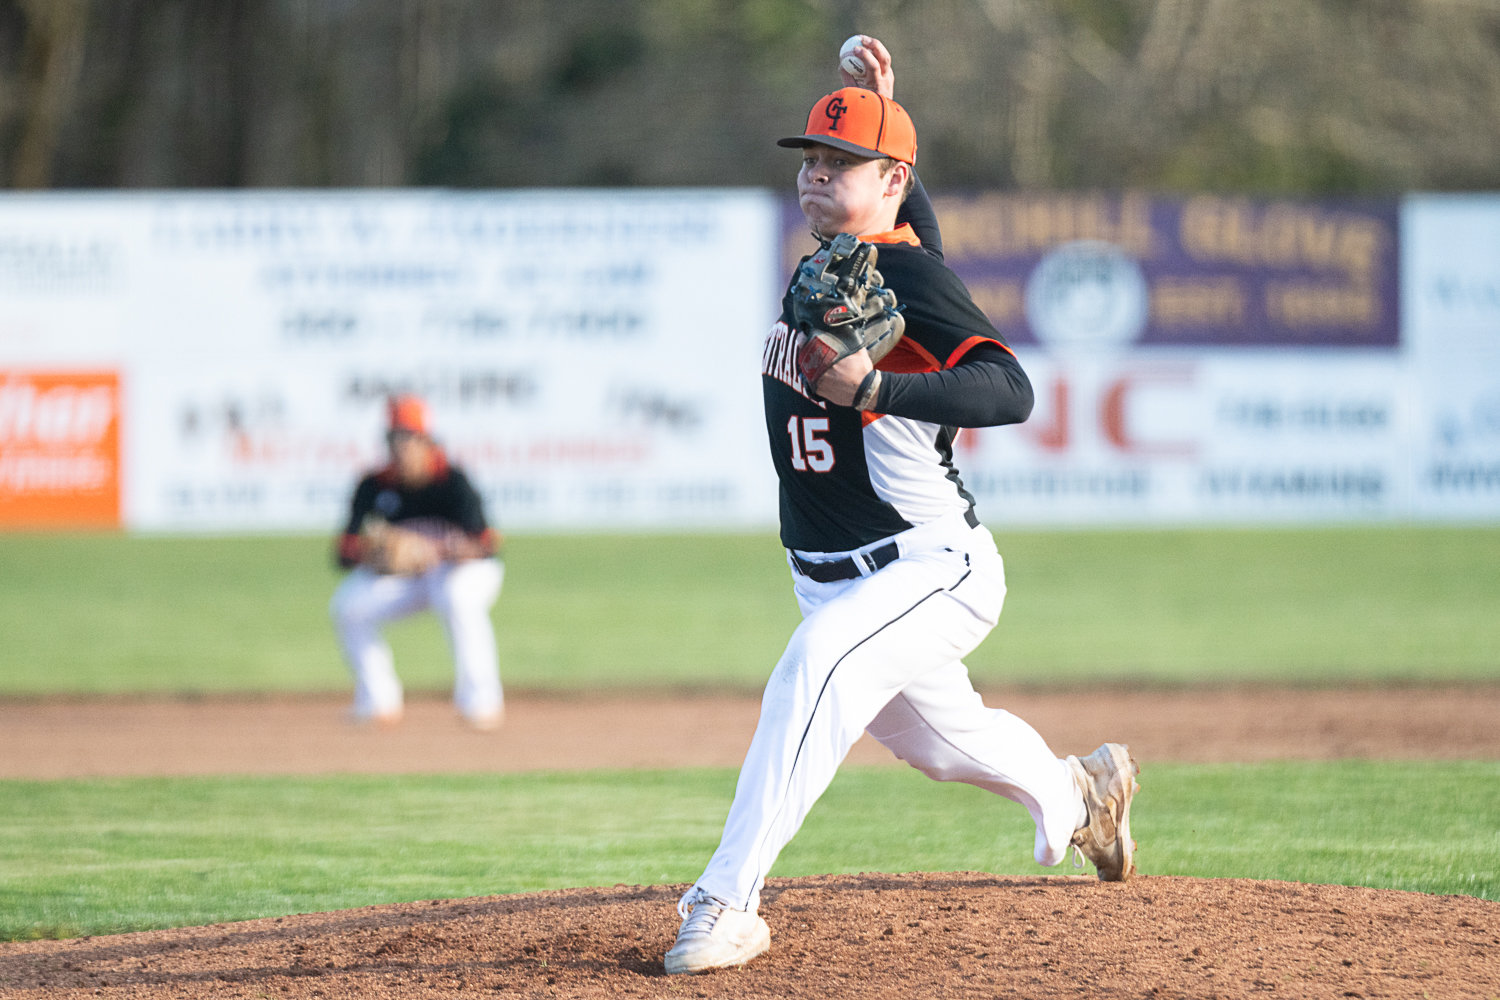 Tucker Weaver throws a pitch during Centralia's 14-13 win over Aberdeen on March 21.